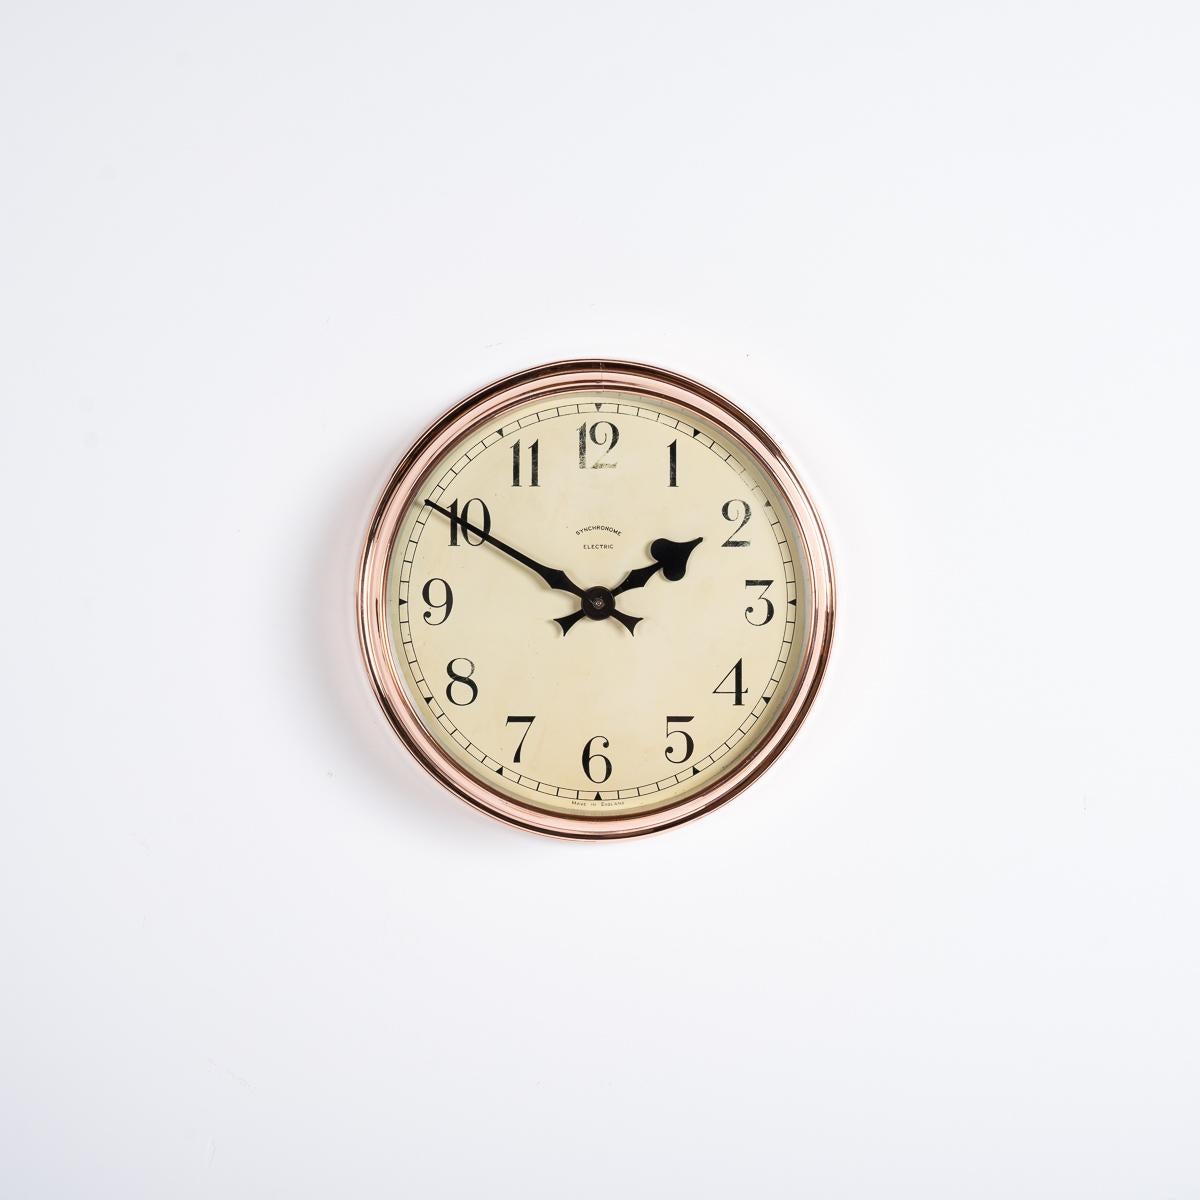 Vintage Industrial Polished Copper Case Wall Clock By Synchronome 6